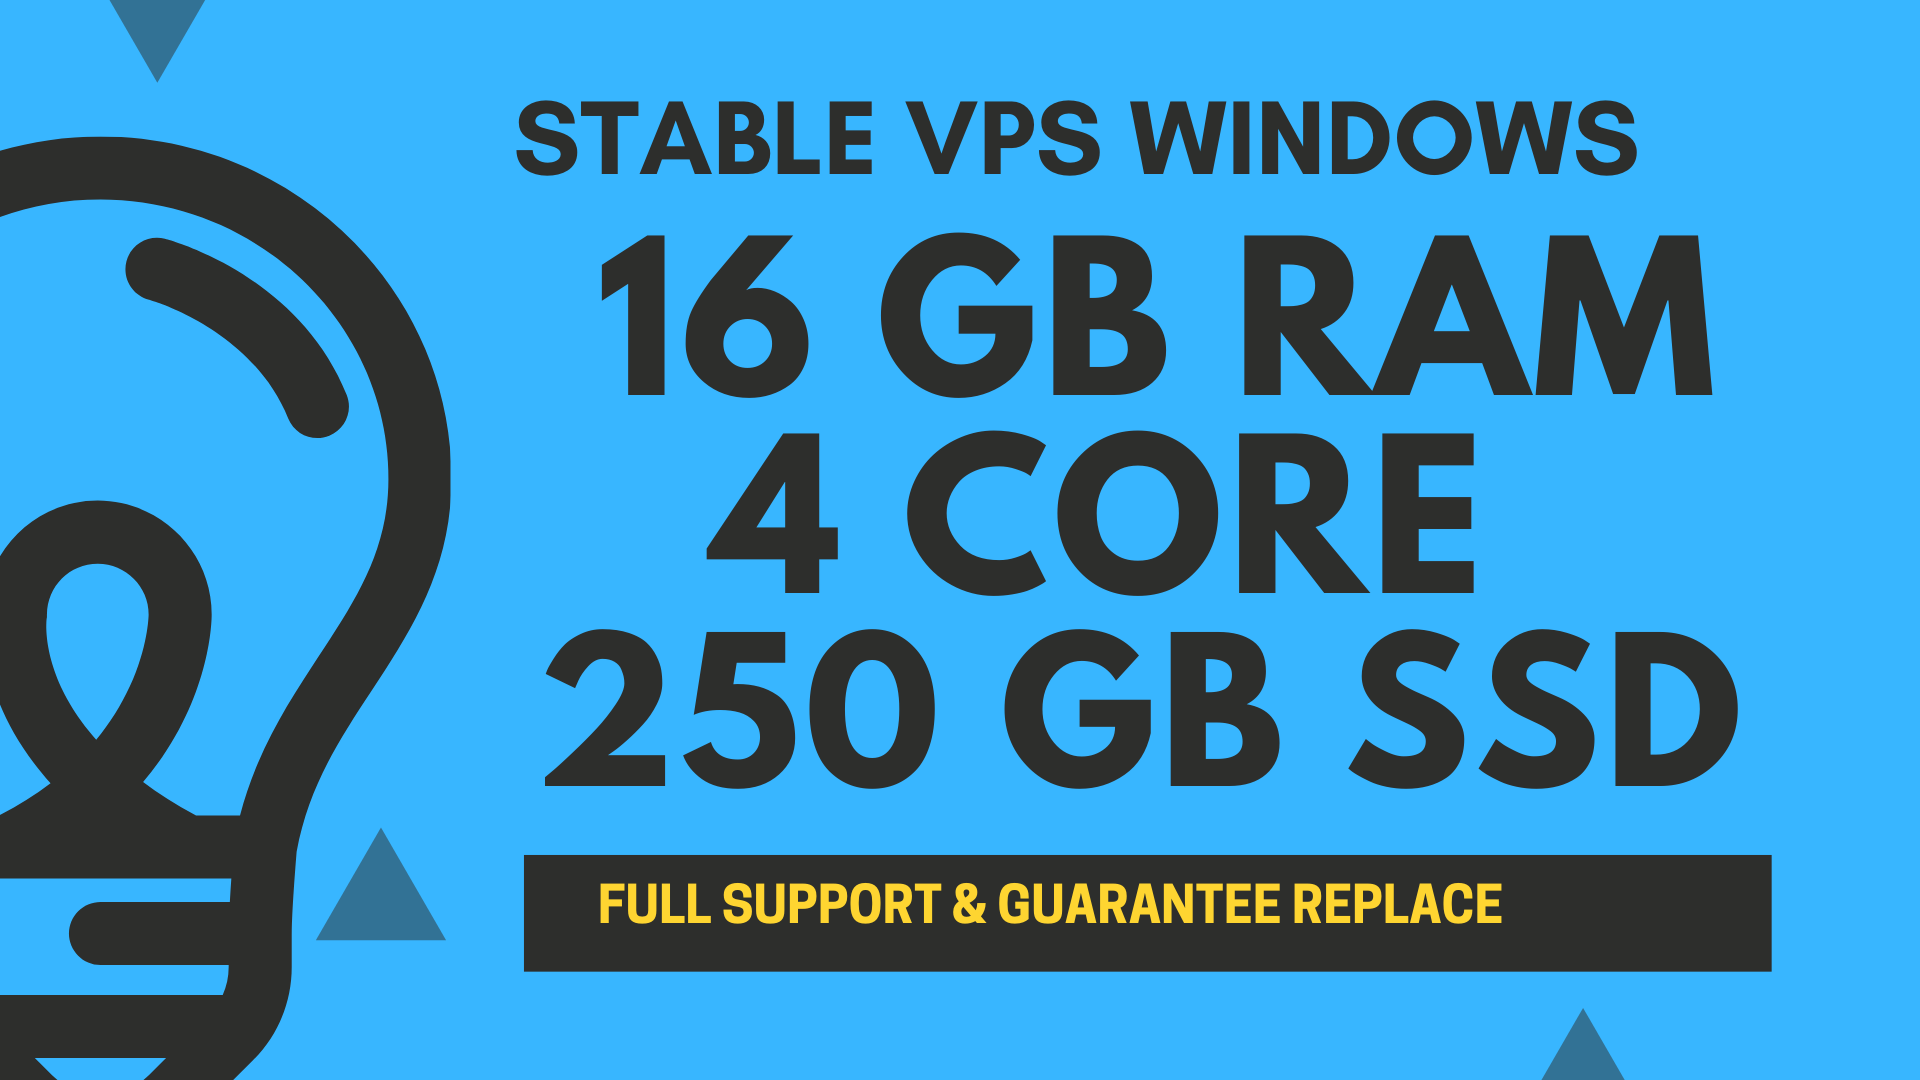 STABLE Windows VPS RDP 16GB RAM 4CORE 250GB SSD for $25 ...